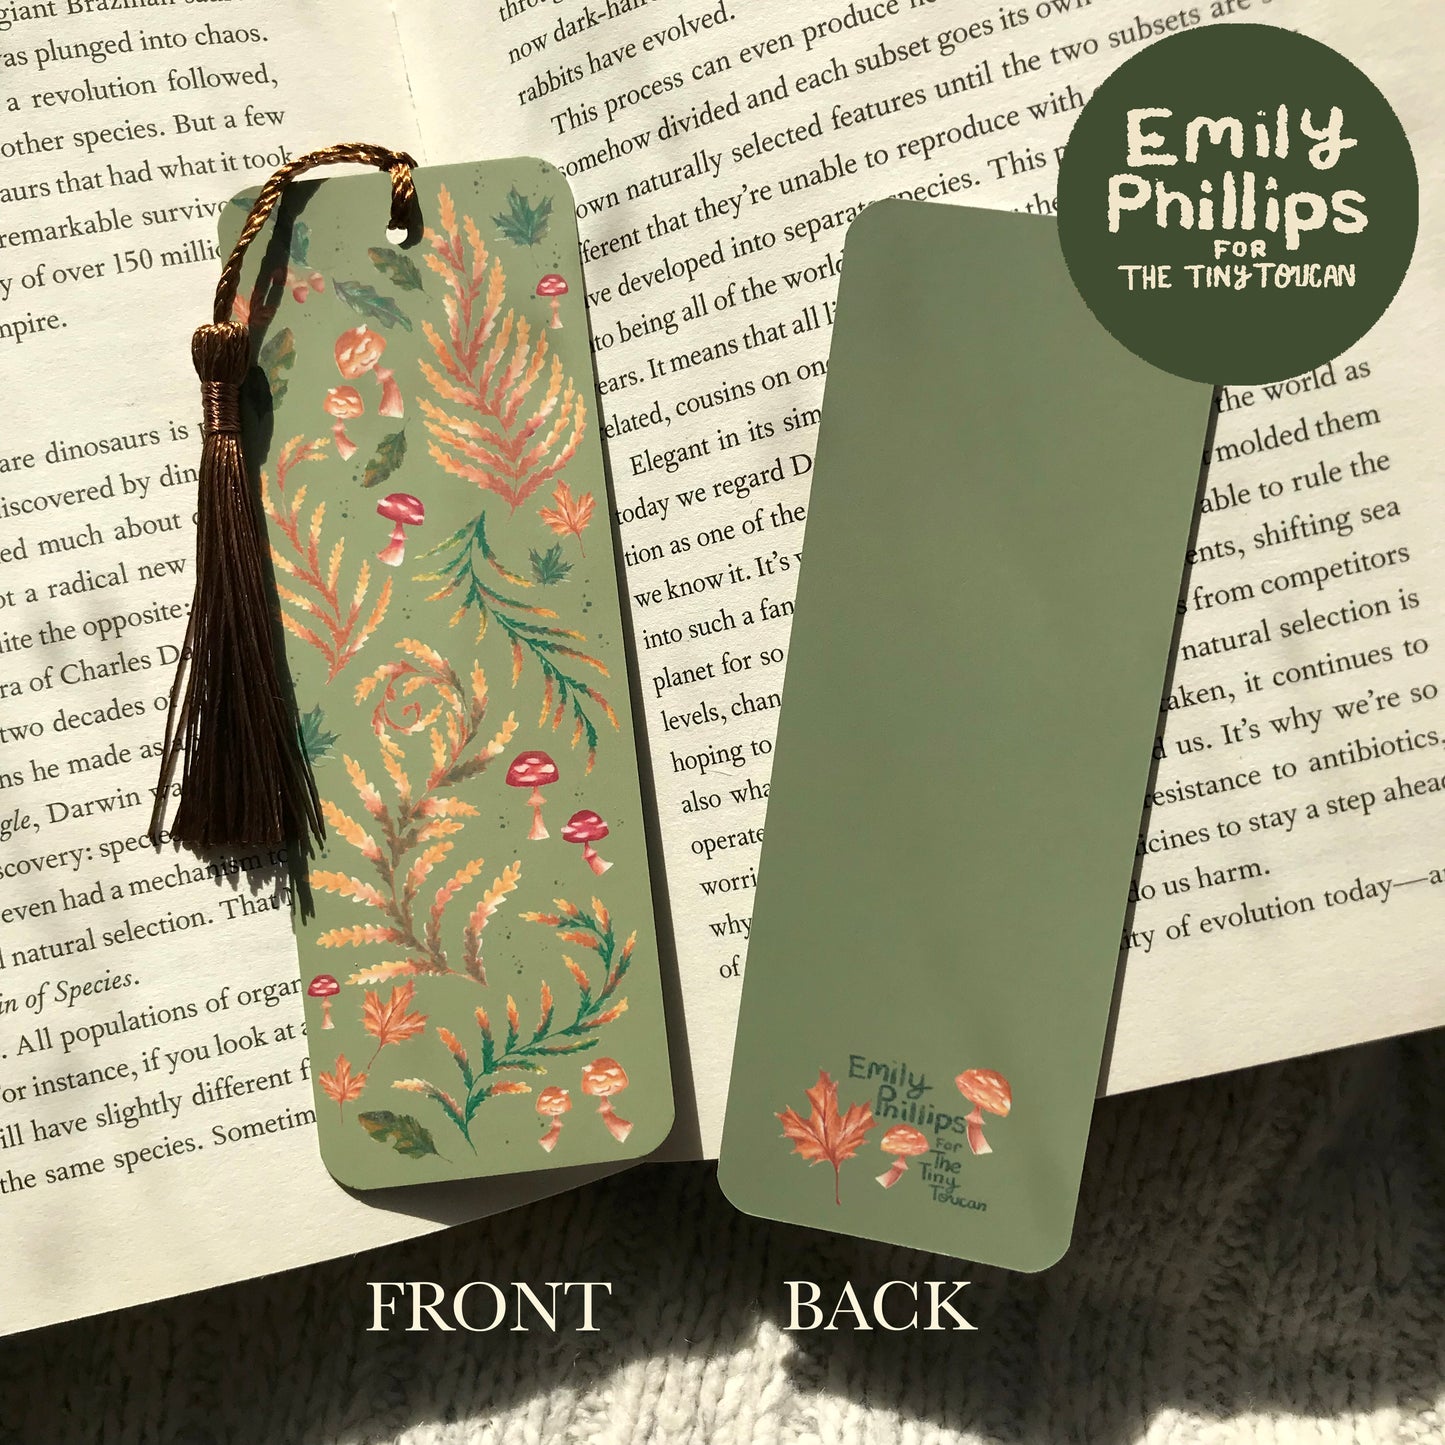 Autumn Leaves Bookmark by EMILY PHILLIPS